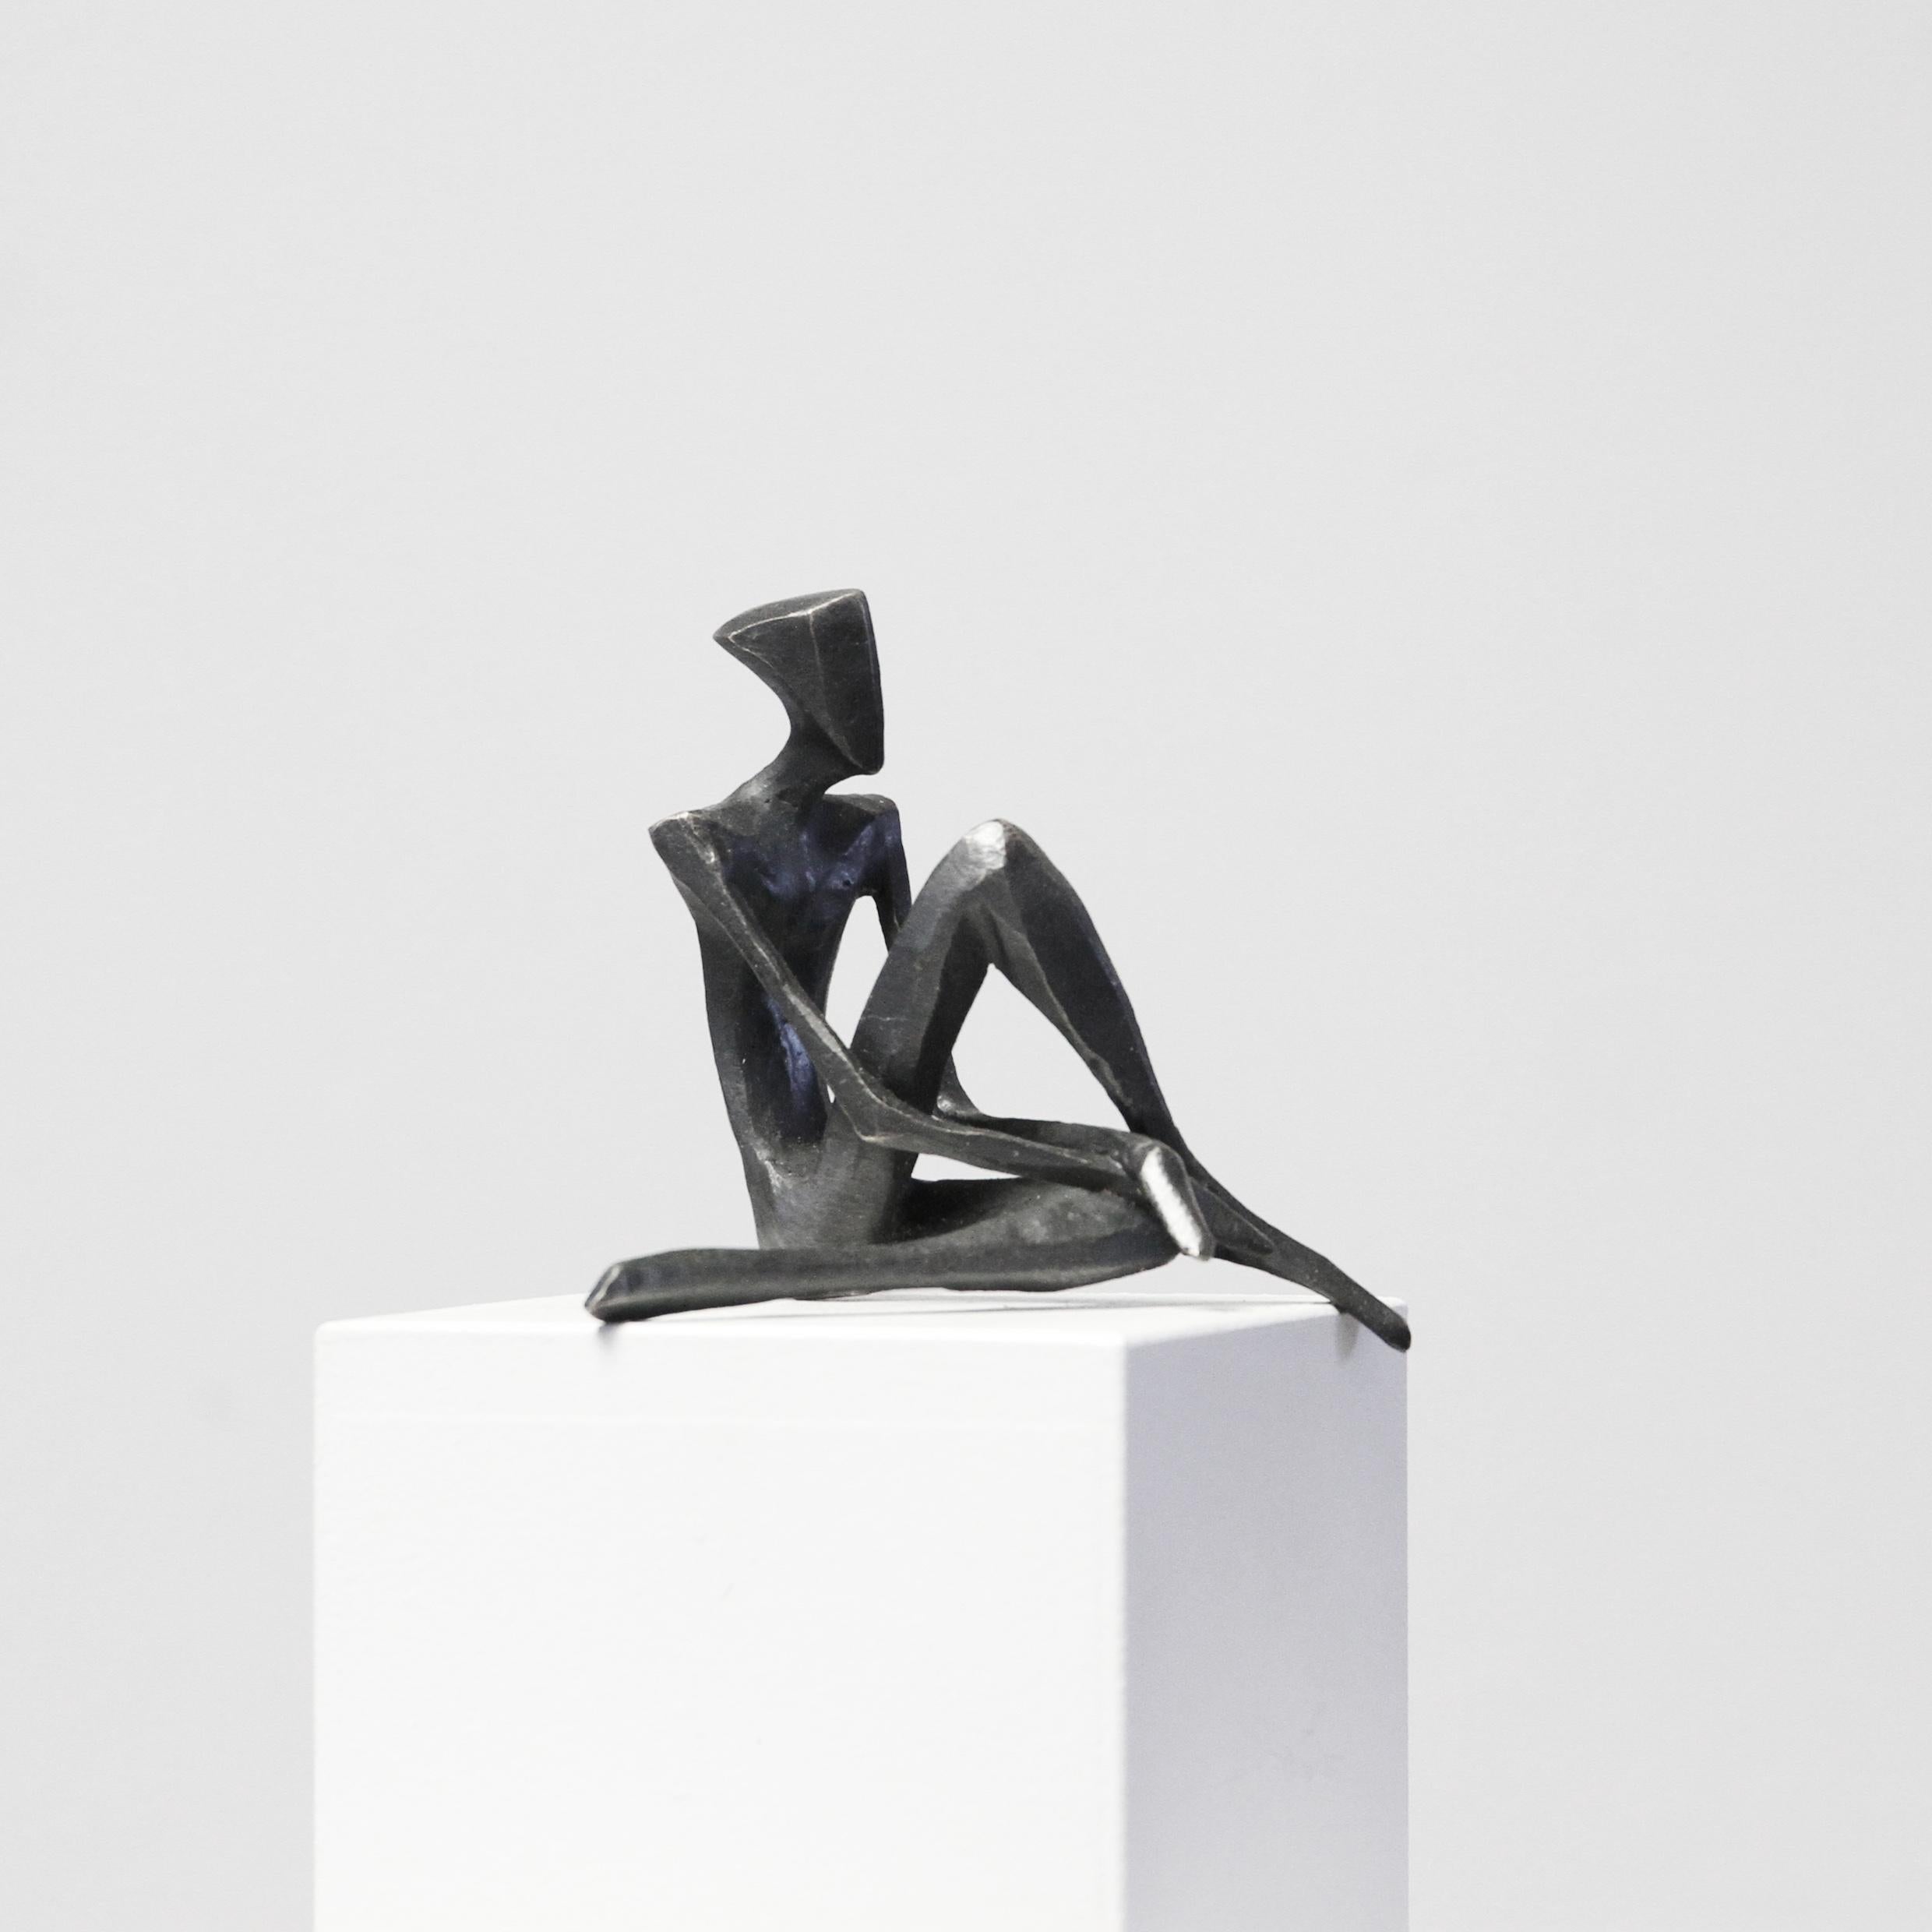 Rob is a figurative bronze sculpture in a relaxed pose by Nando Kallweit.

Modelled on modern youthful postures but with a nod to the importance of heritage through the stylised Egyptian-influenced head. A lovely piece on its own or with a group of